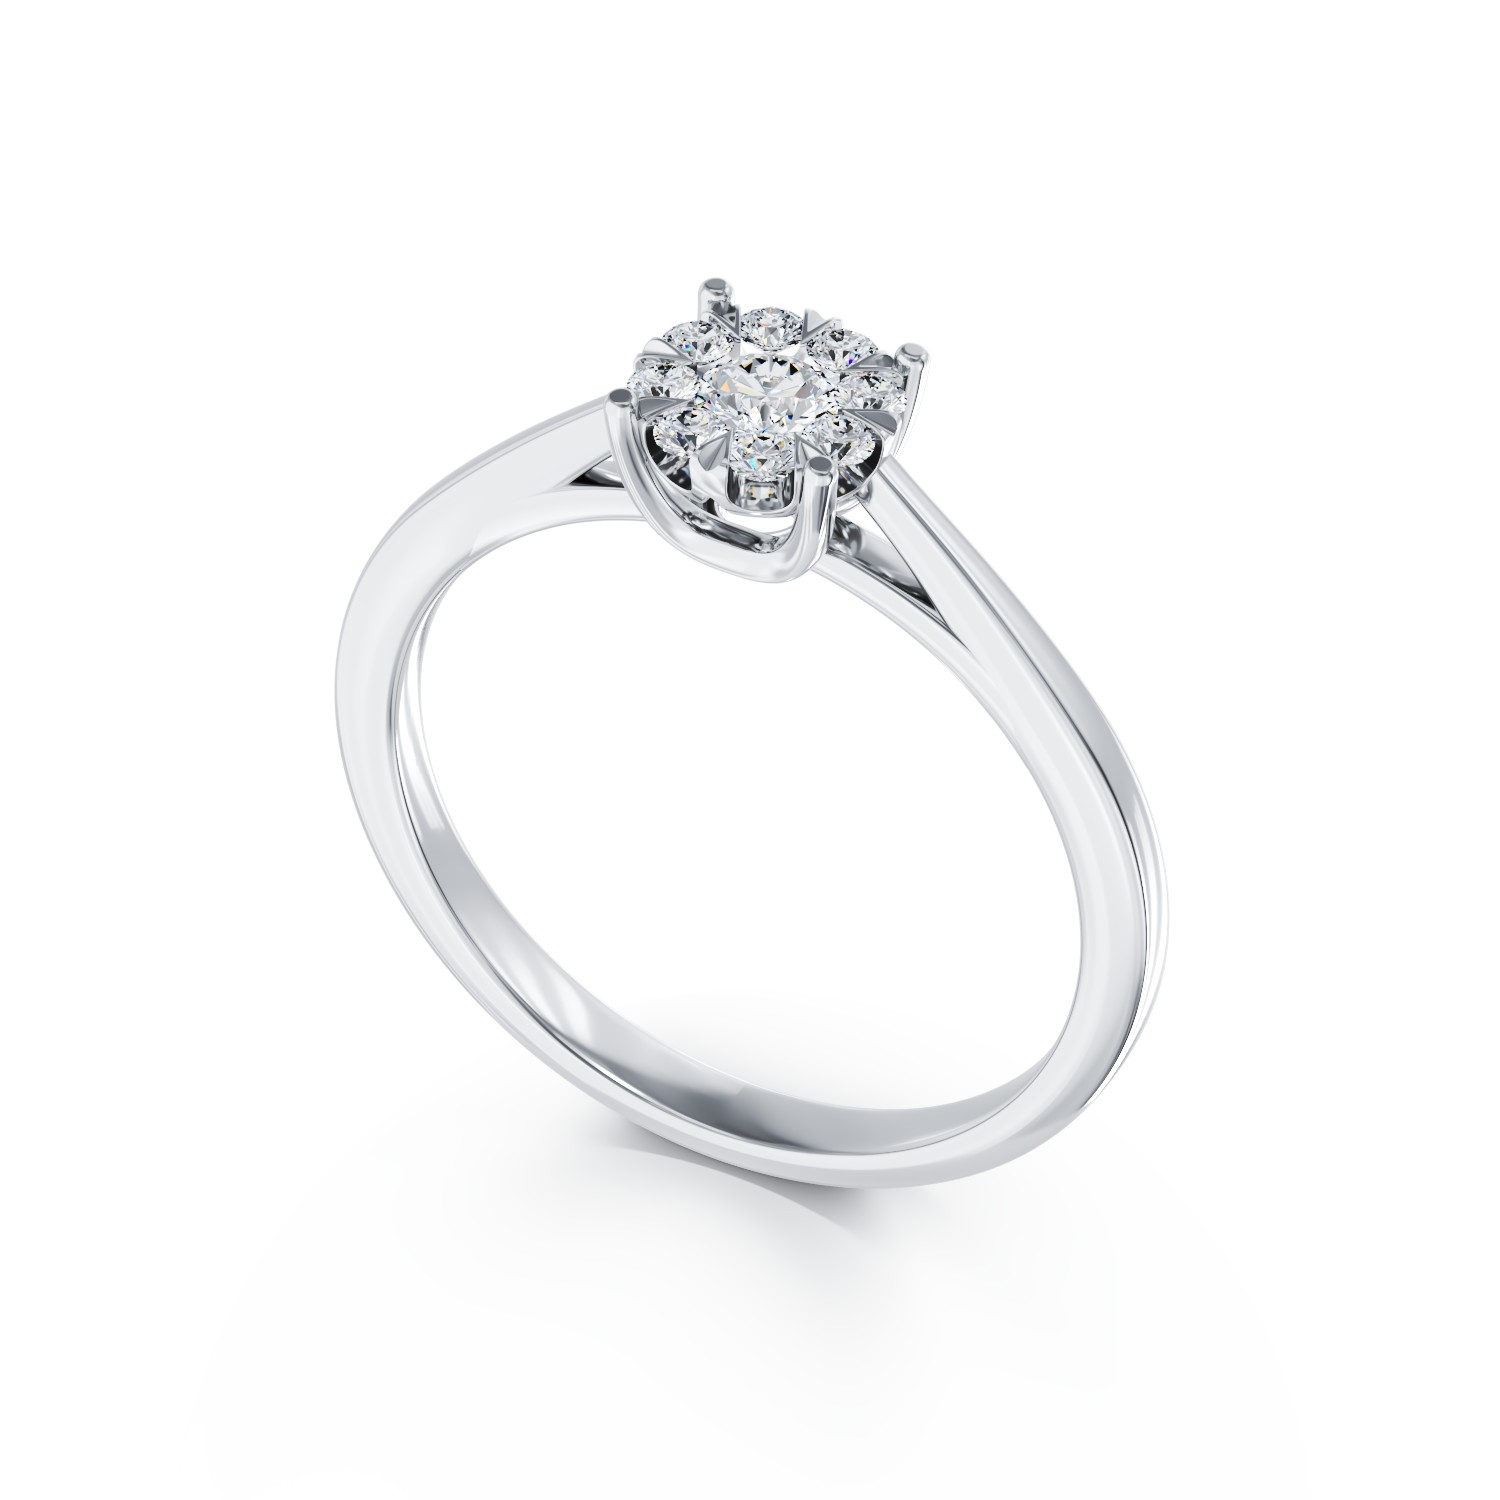 White gold engagement ring with 0.25ct diamonds